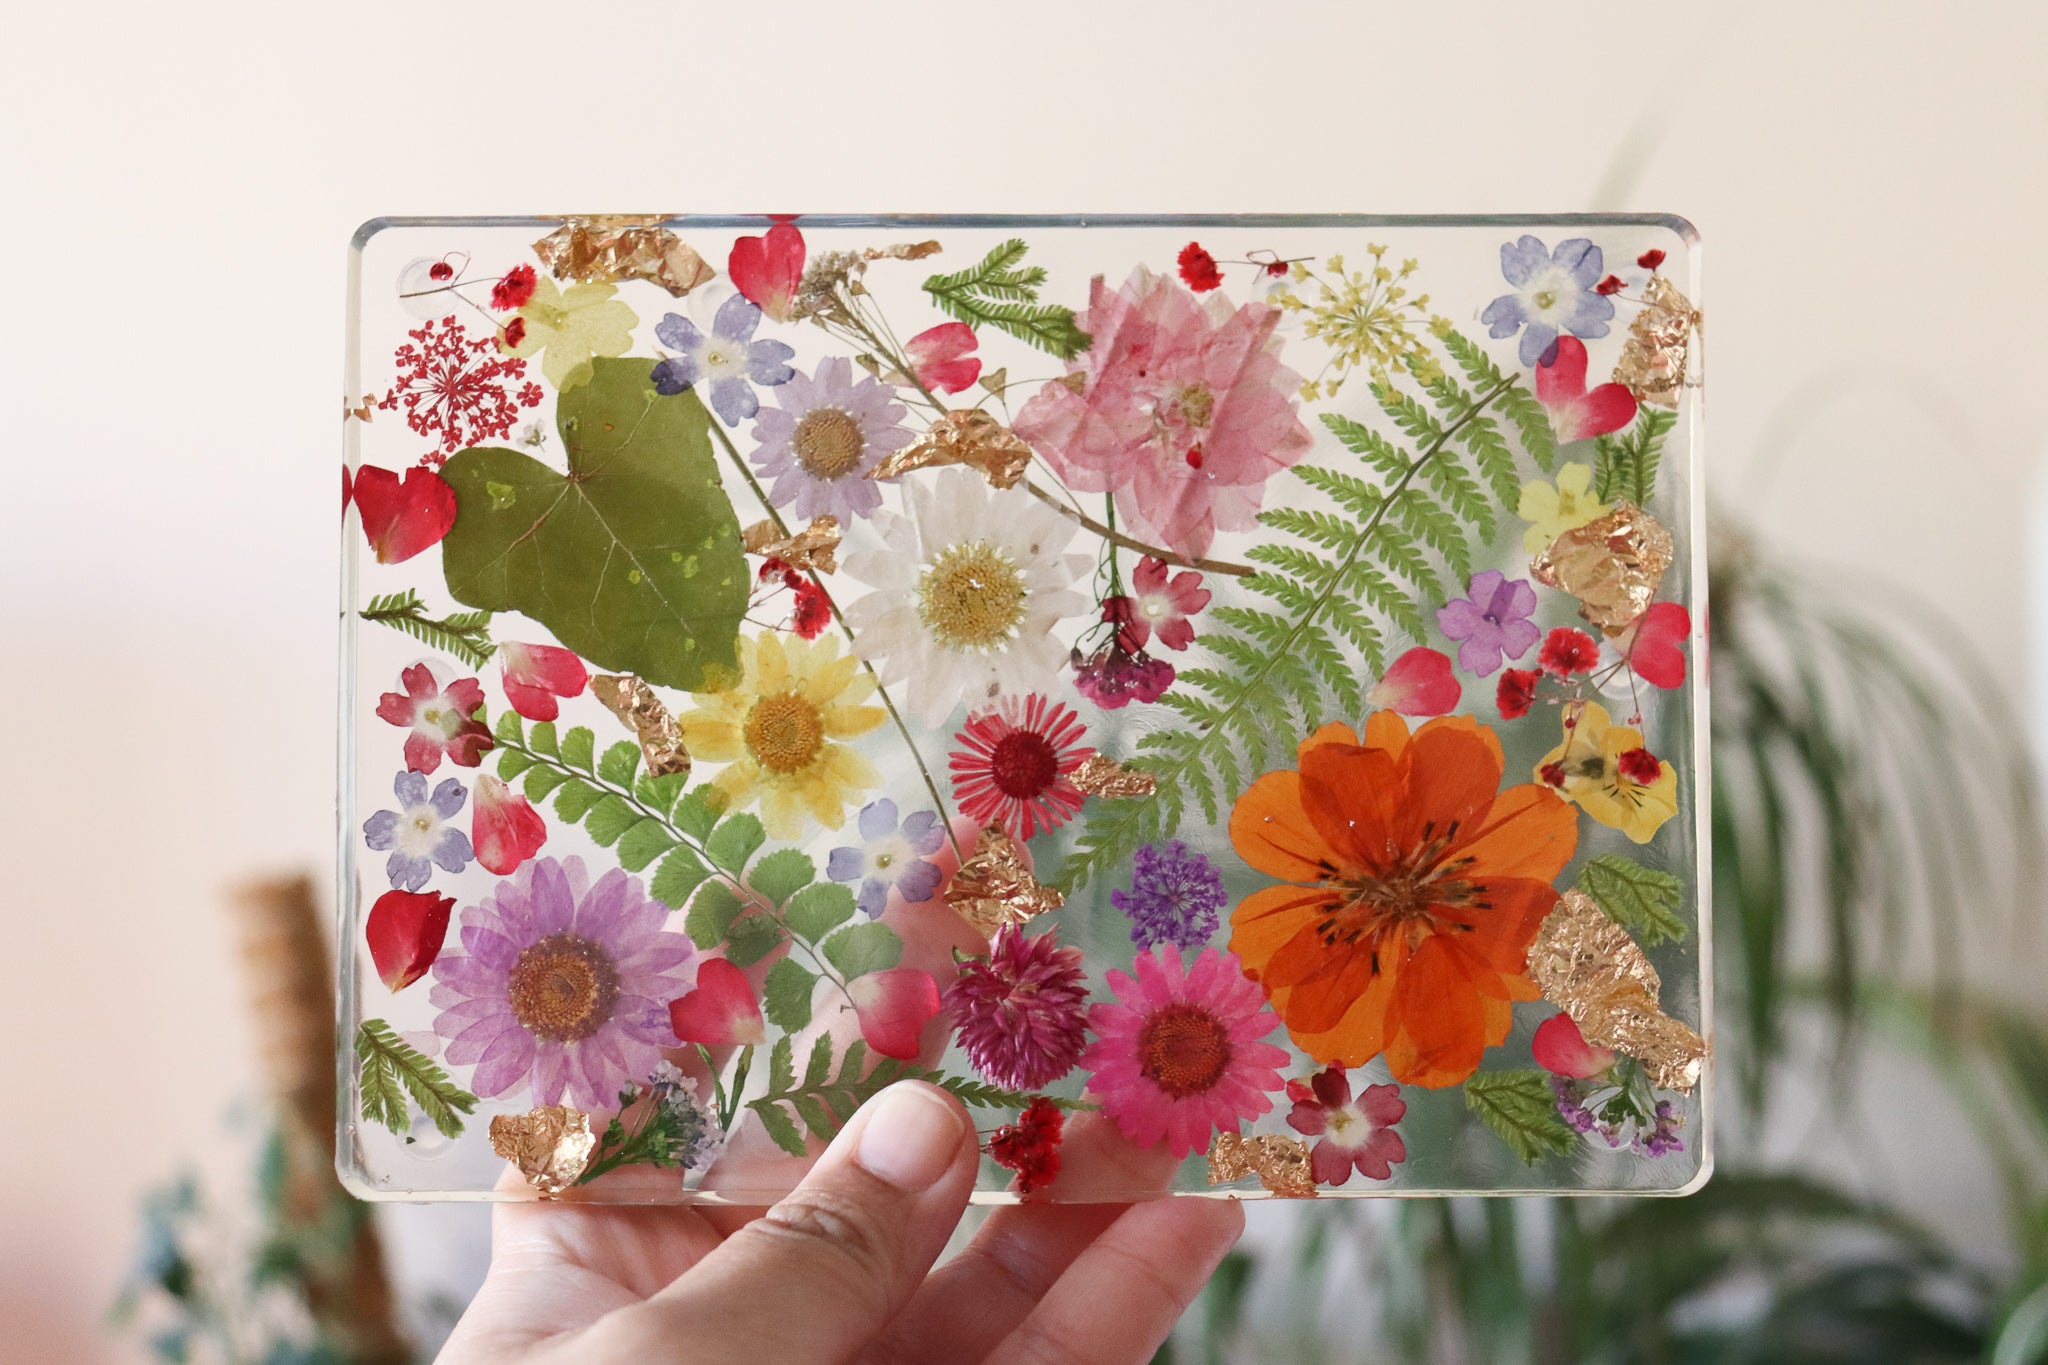 Colorful Gardens - Botanic Trays & Coasters by Caretuals